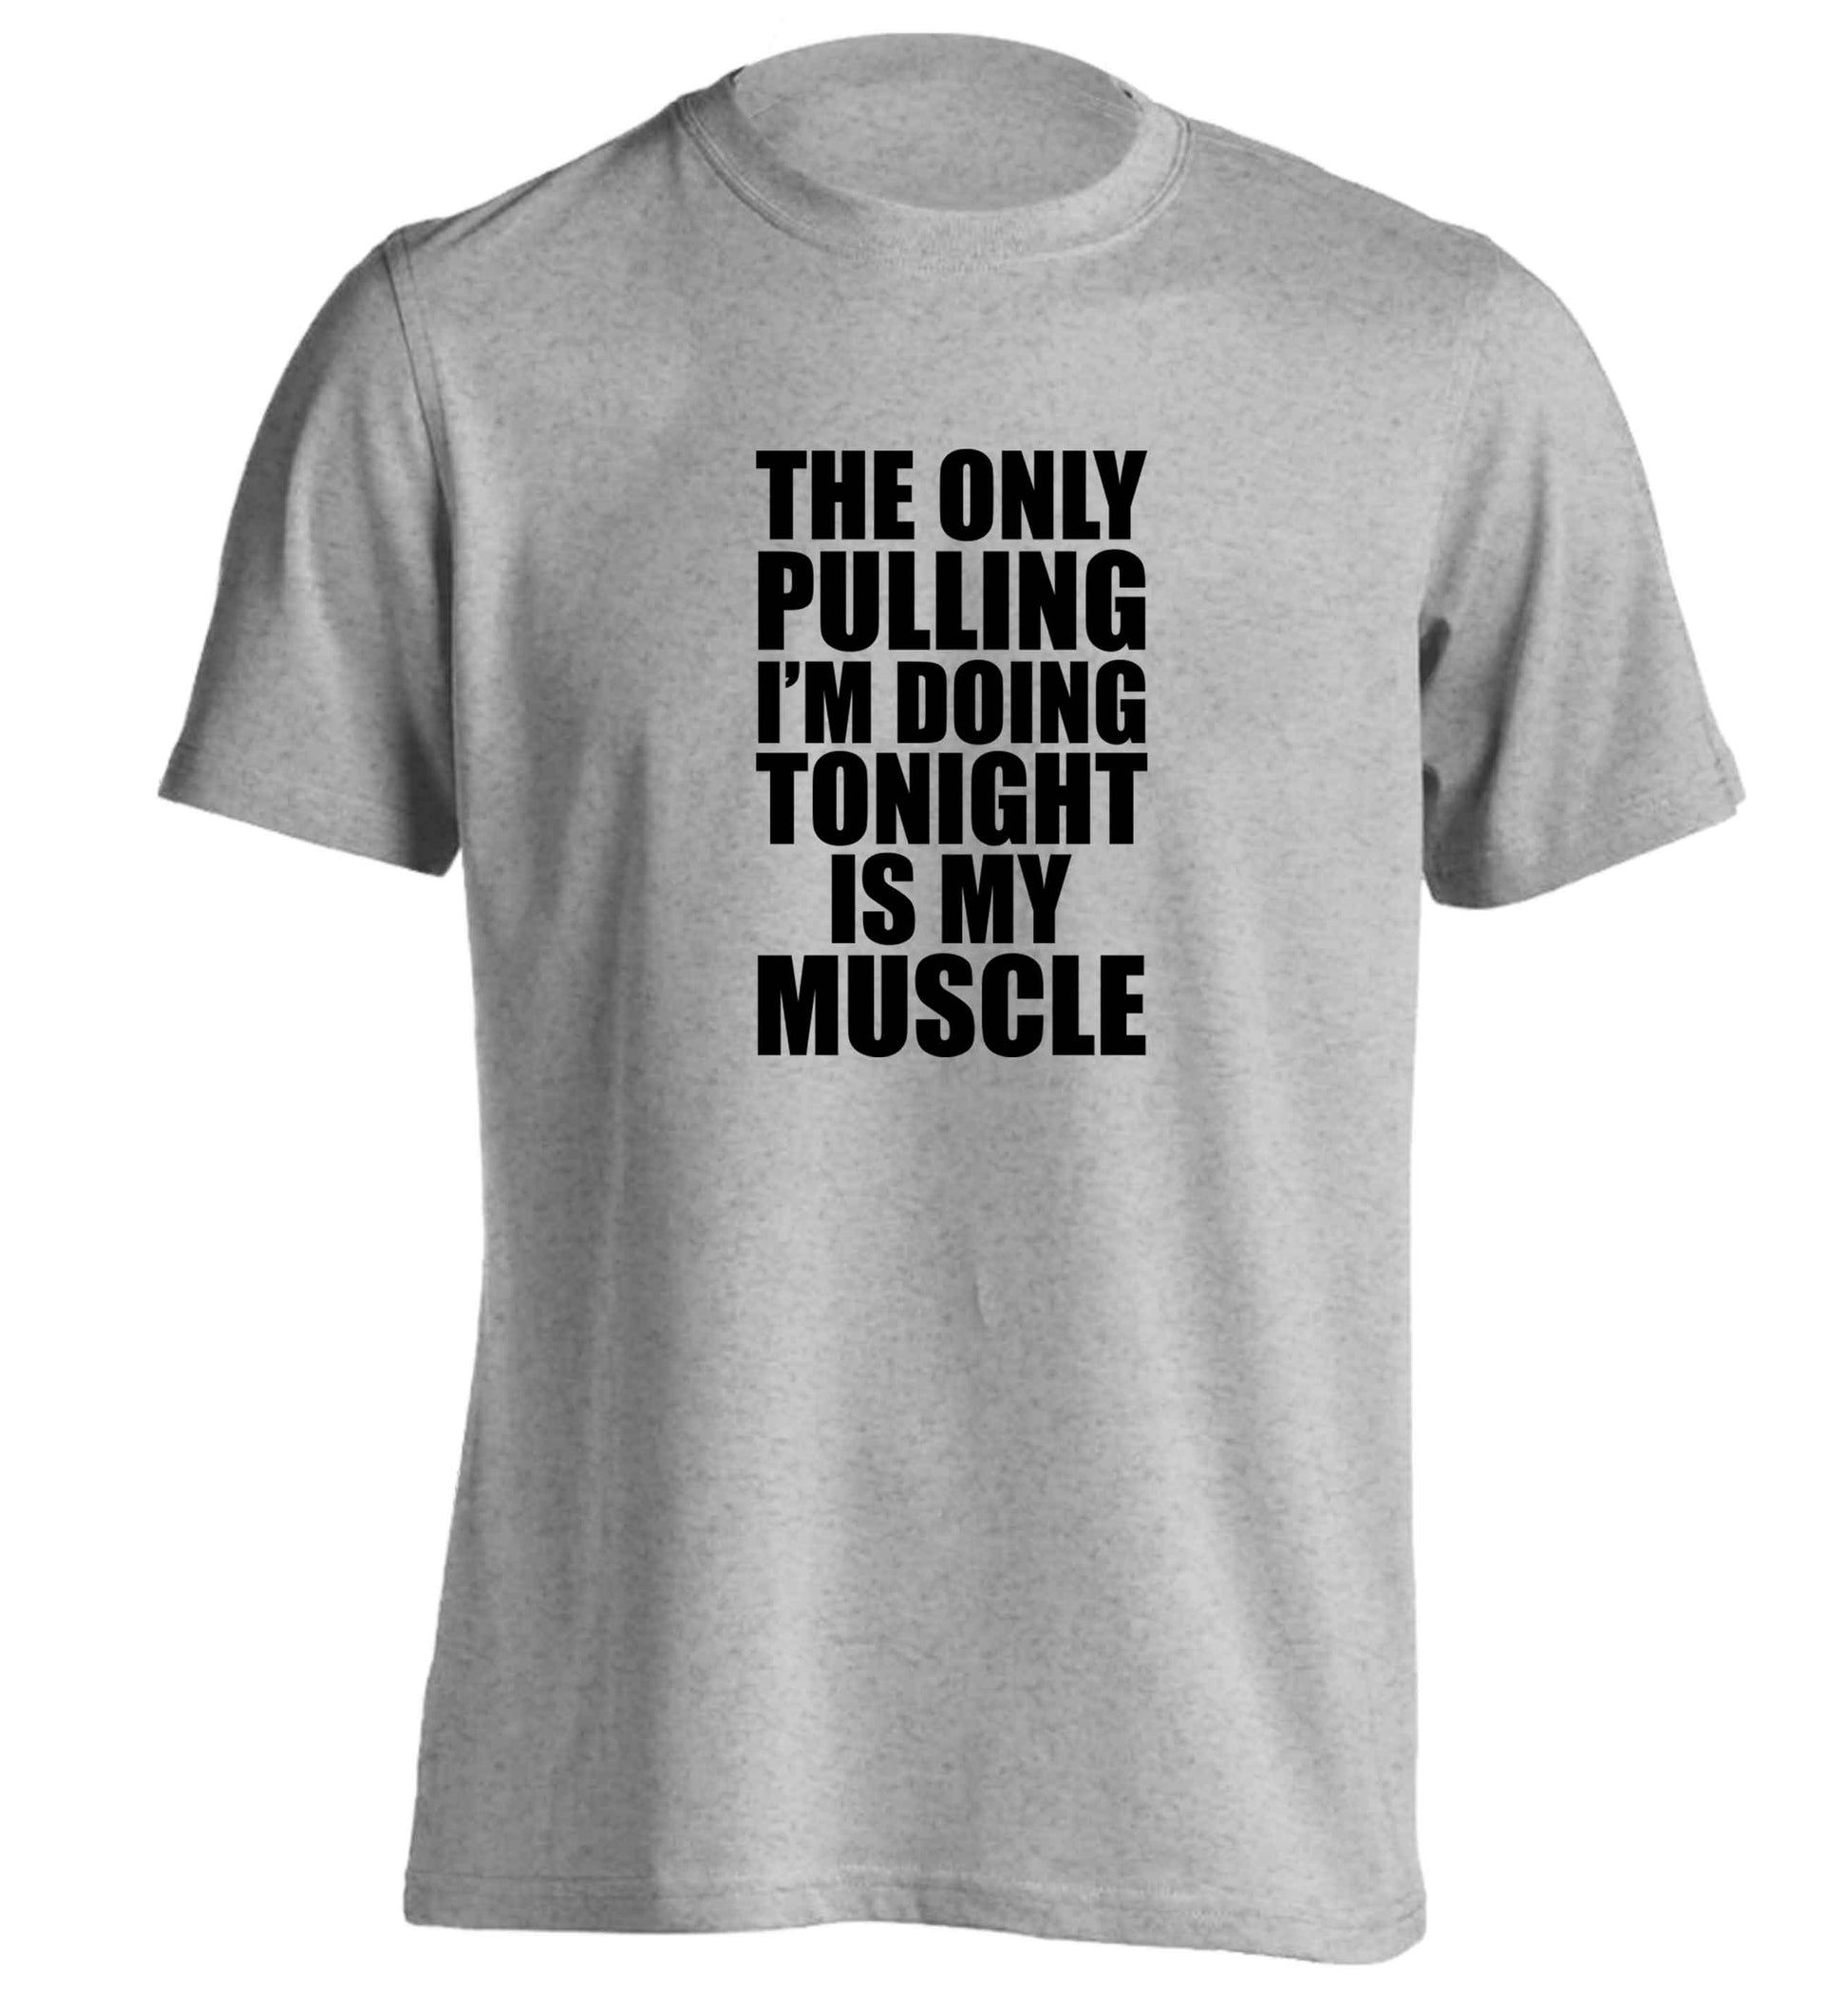 The only pulling I'm doing tonight is my muscle adults unisex grey Tshirt 2XL